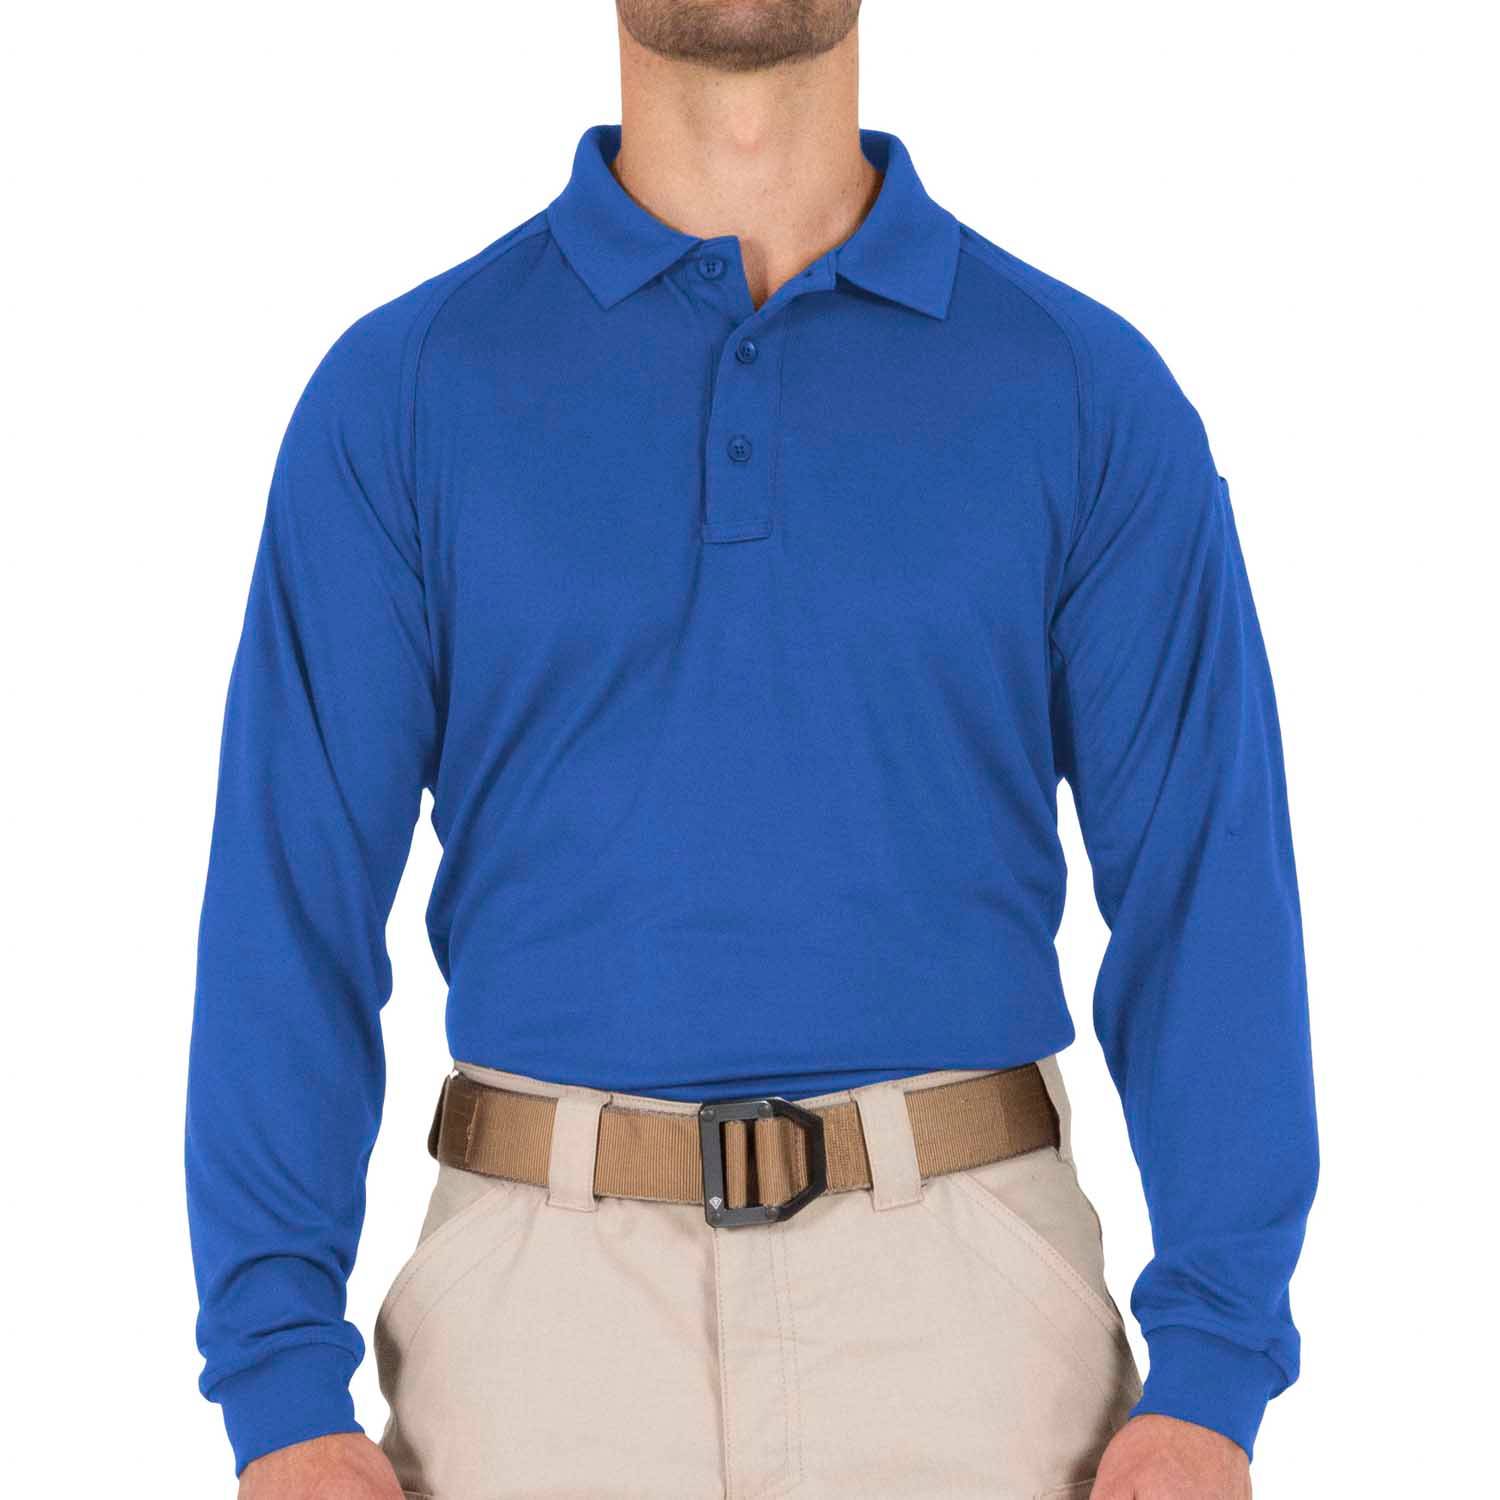 FIRST TACTICAL MEN'S LONG SLEEVE PERFORMANCE POLO